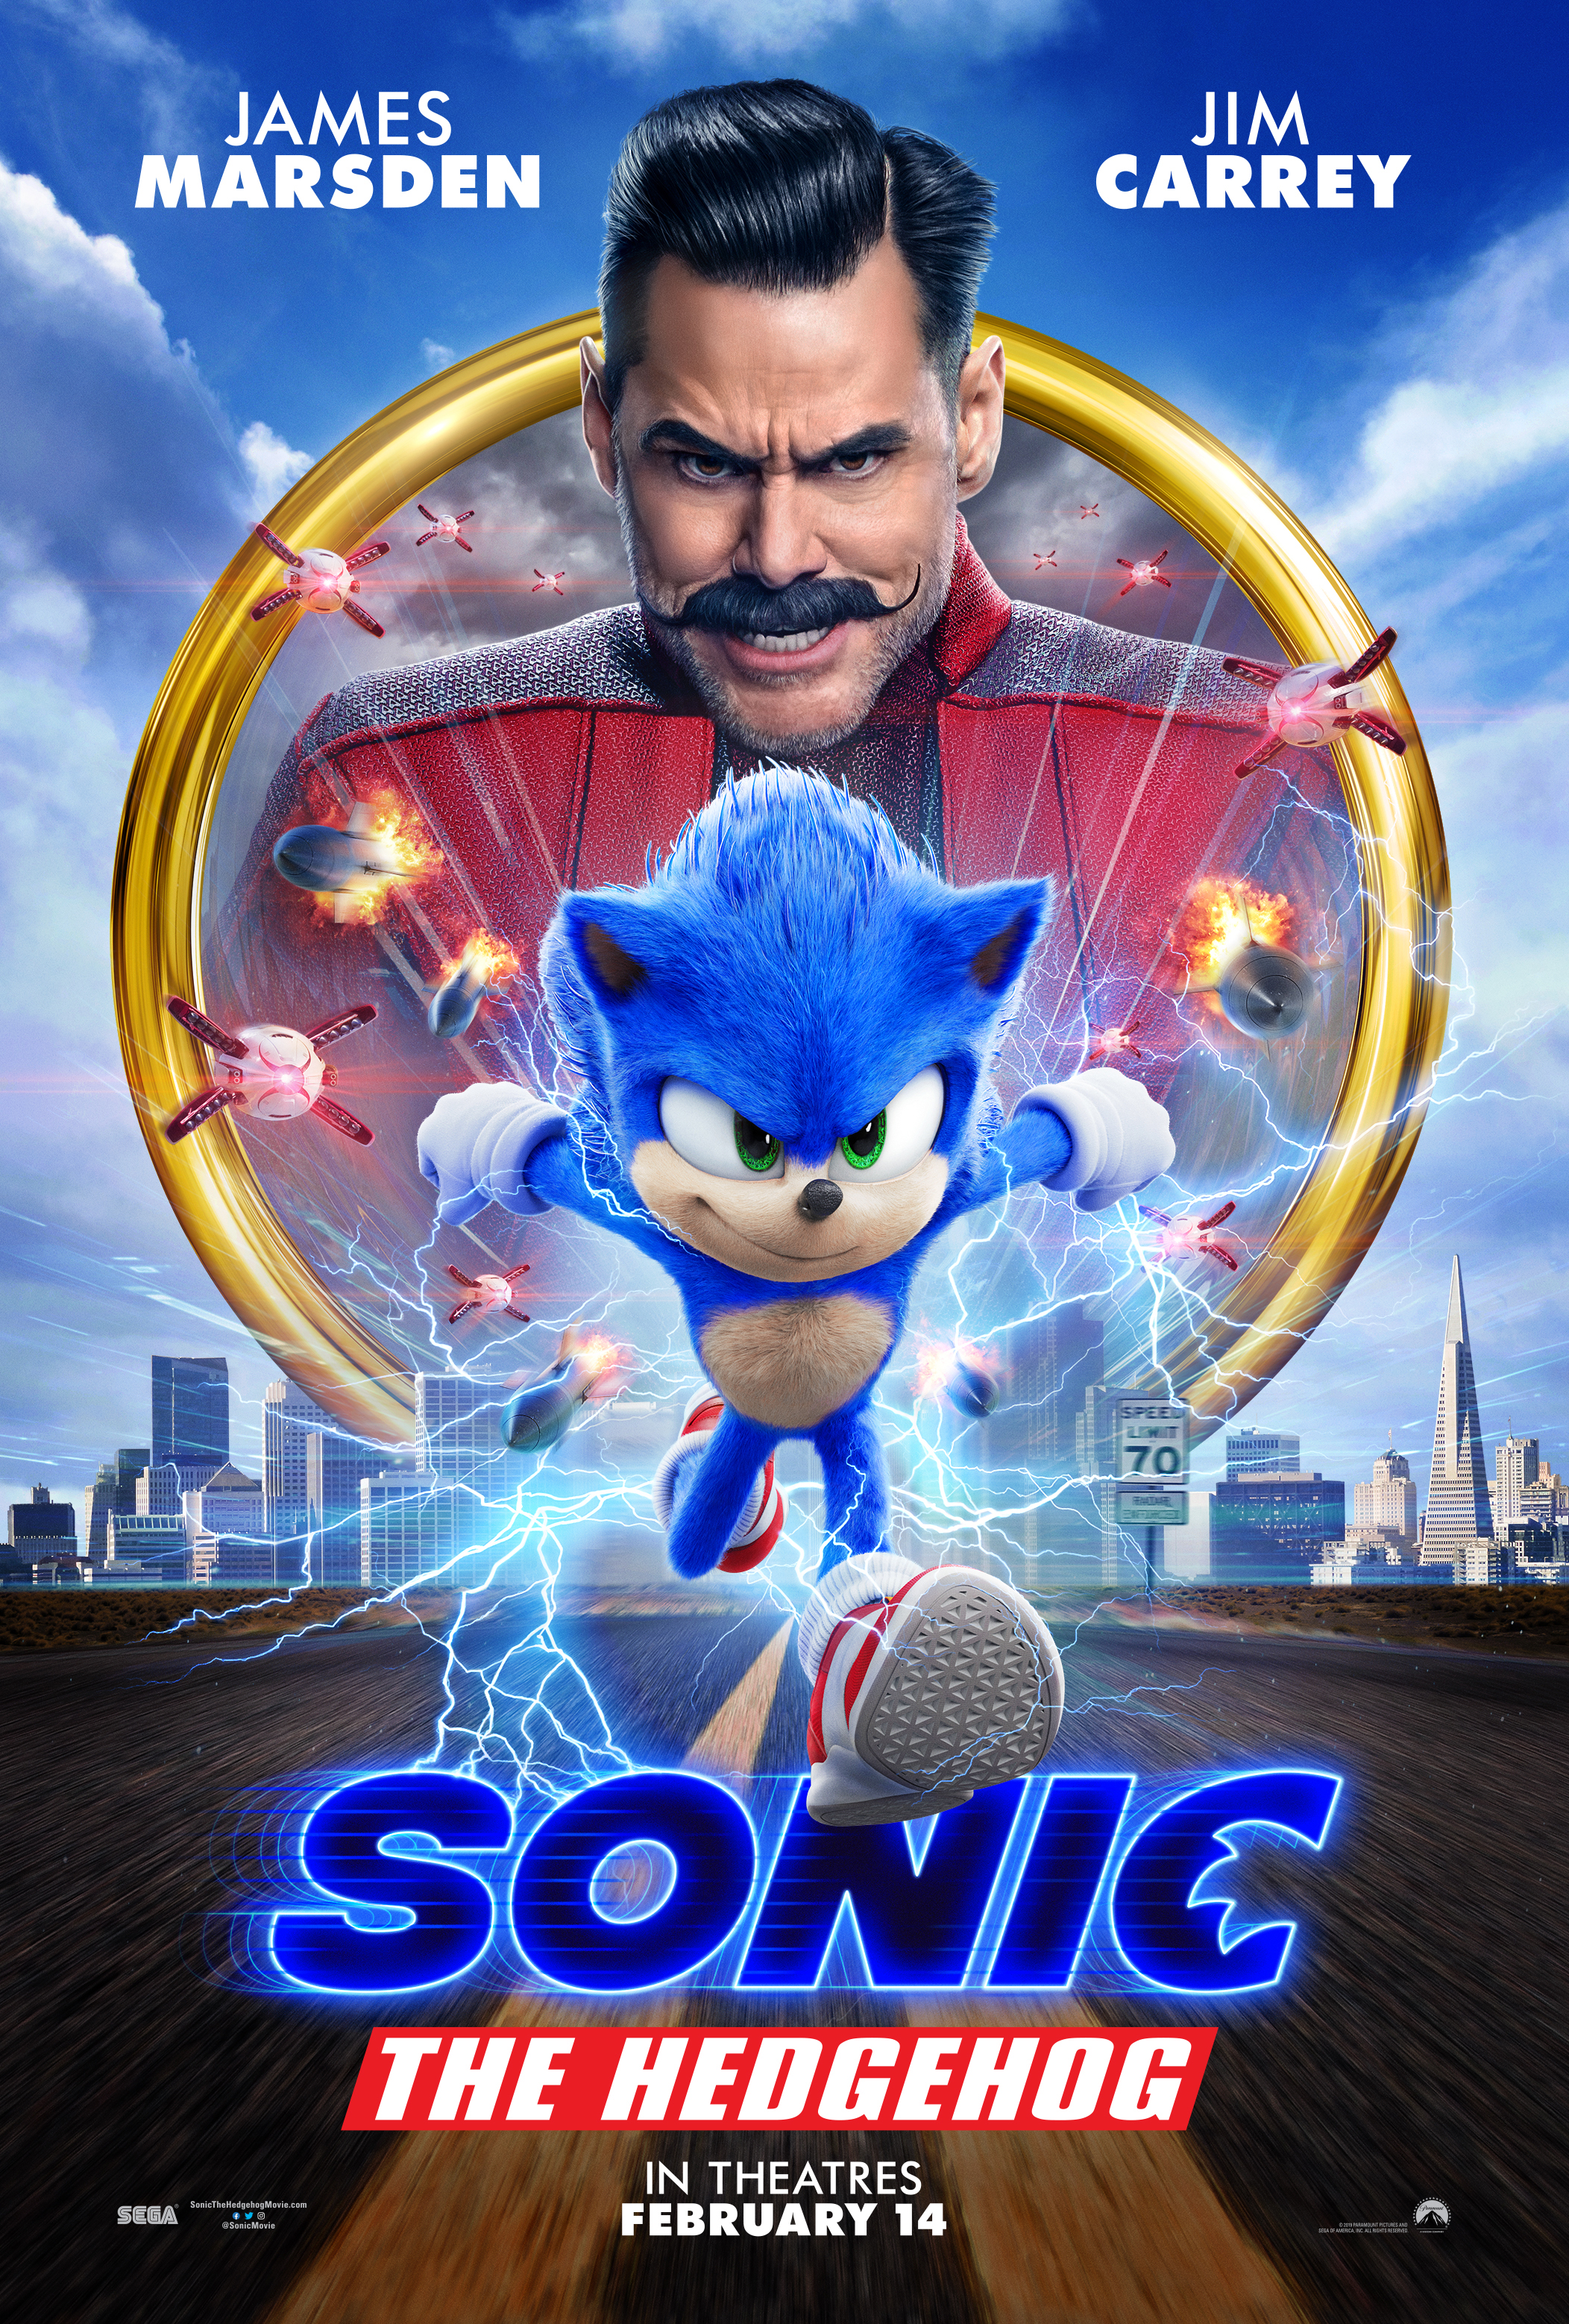 Sonic the Hedgehog  Sonic the Hedgehog Cinematic Universe Wiki